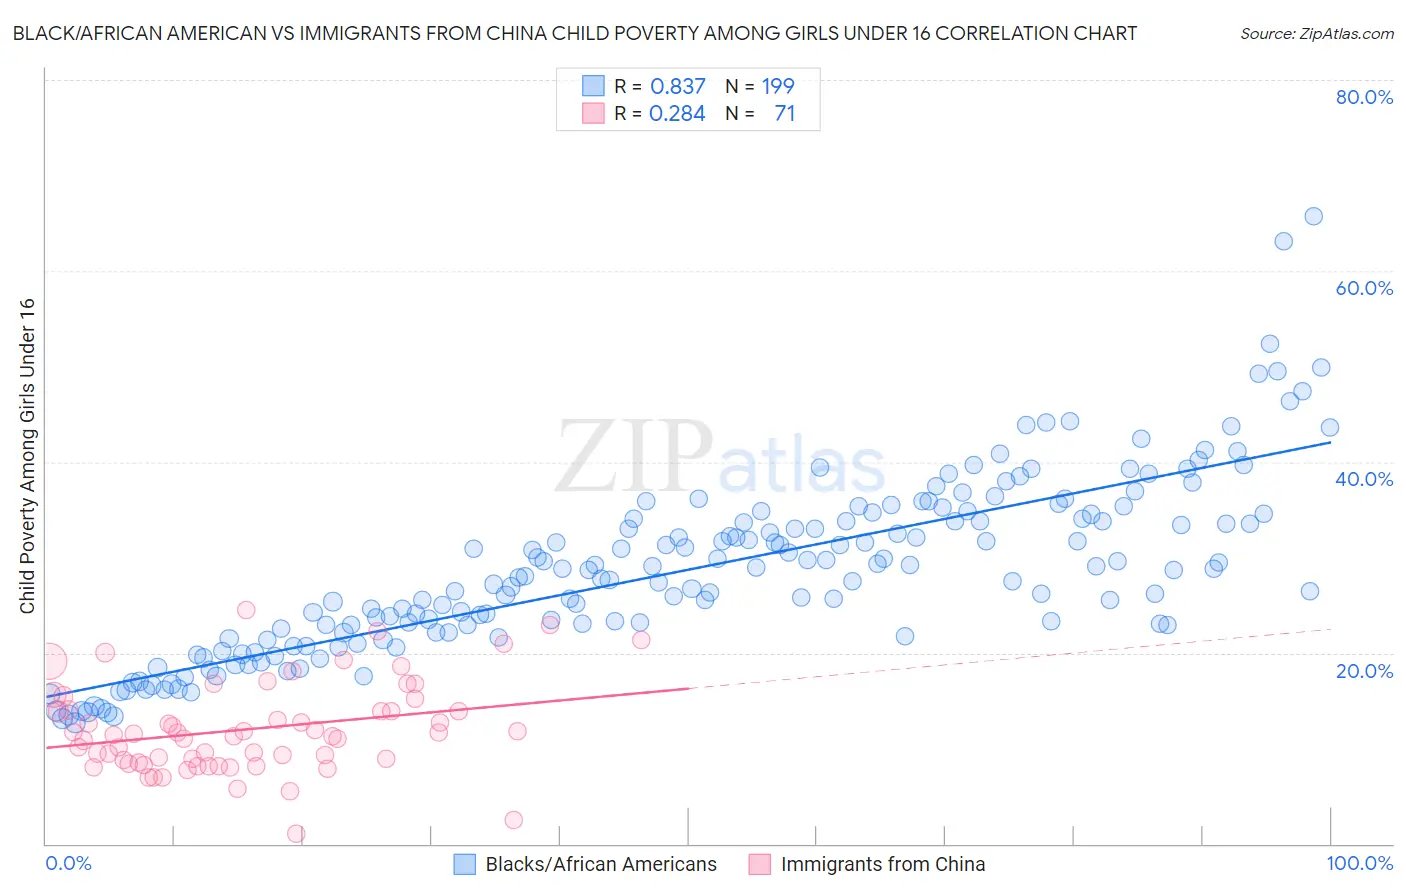 Black/African American vs Immigrants from China Child Poverty Among Girls Under 16